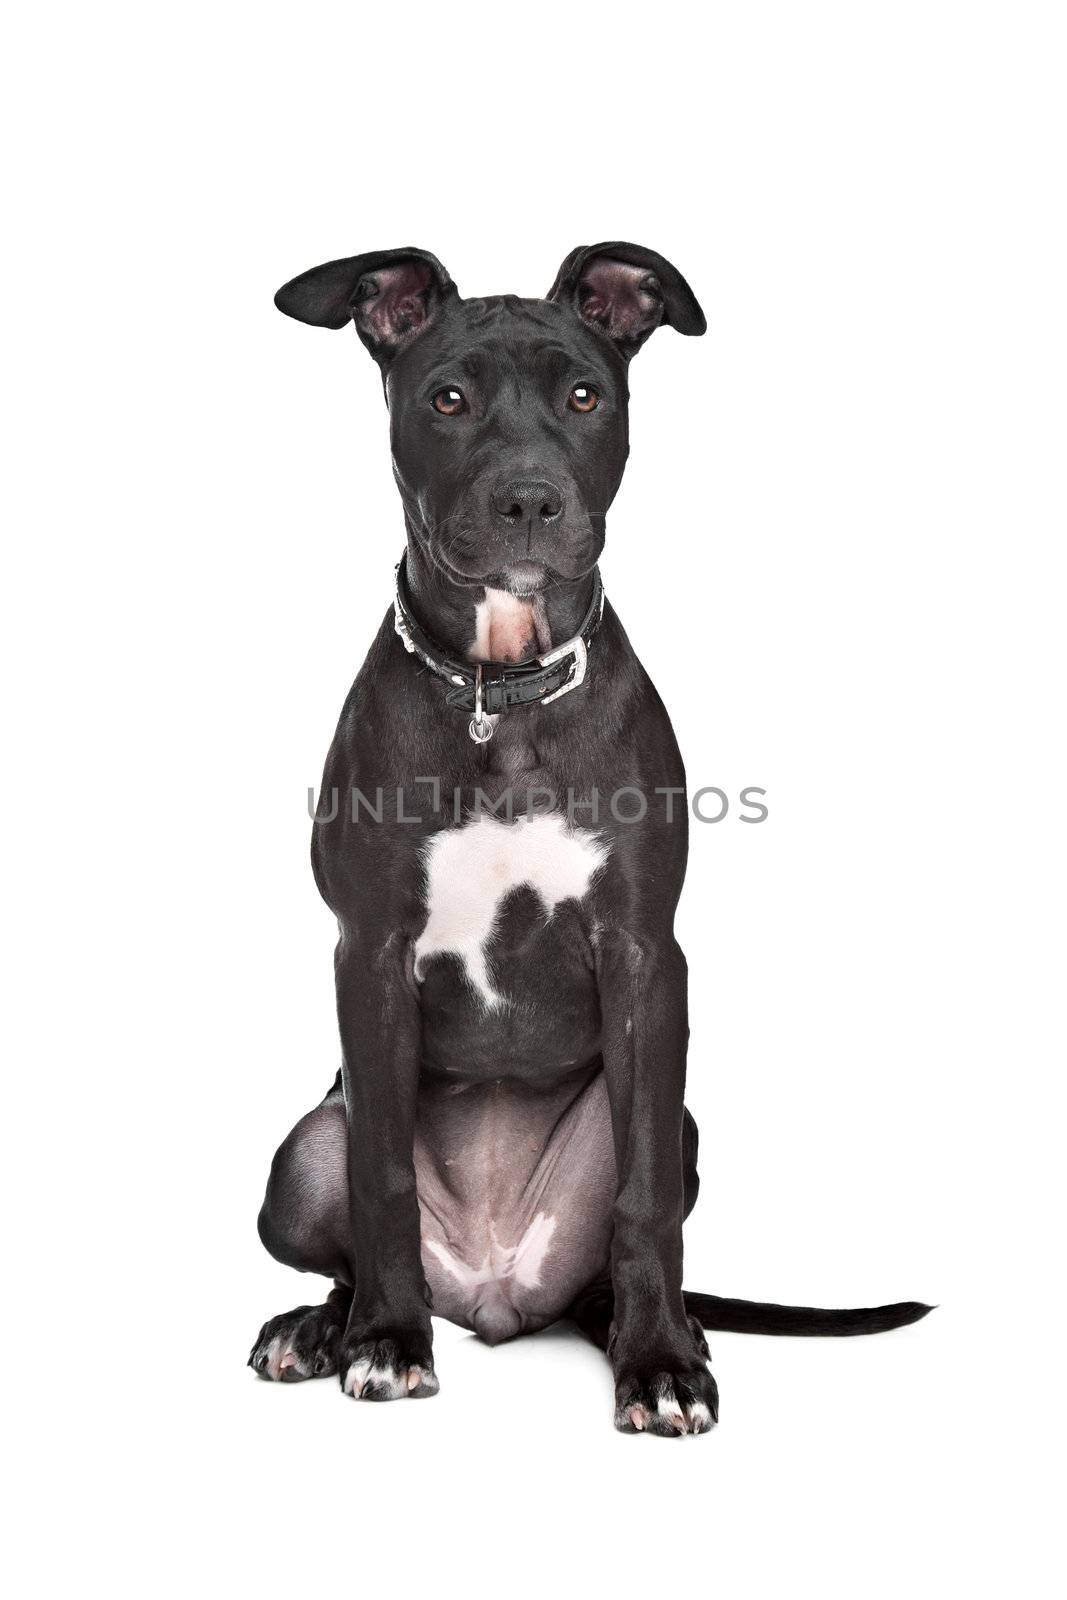 Staffordshire bull terrier puppy in front of white background